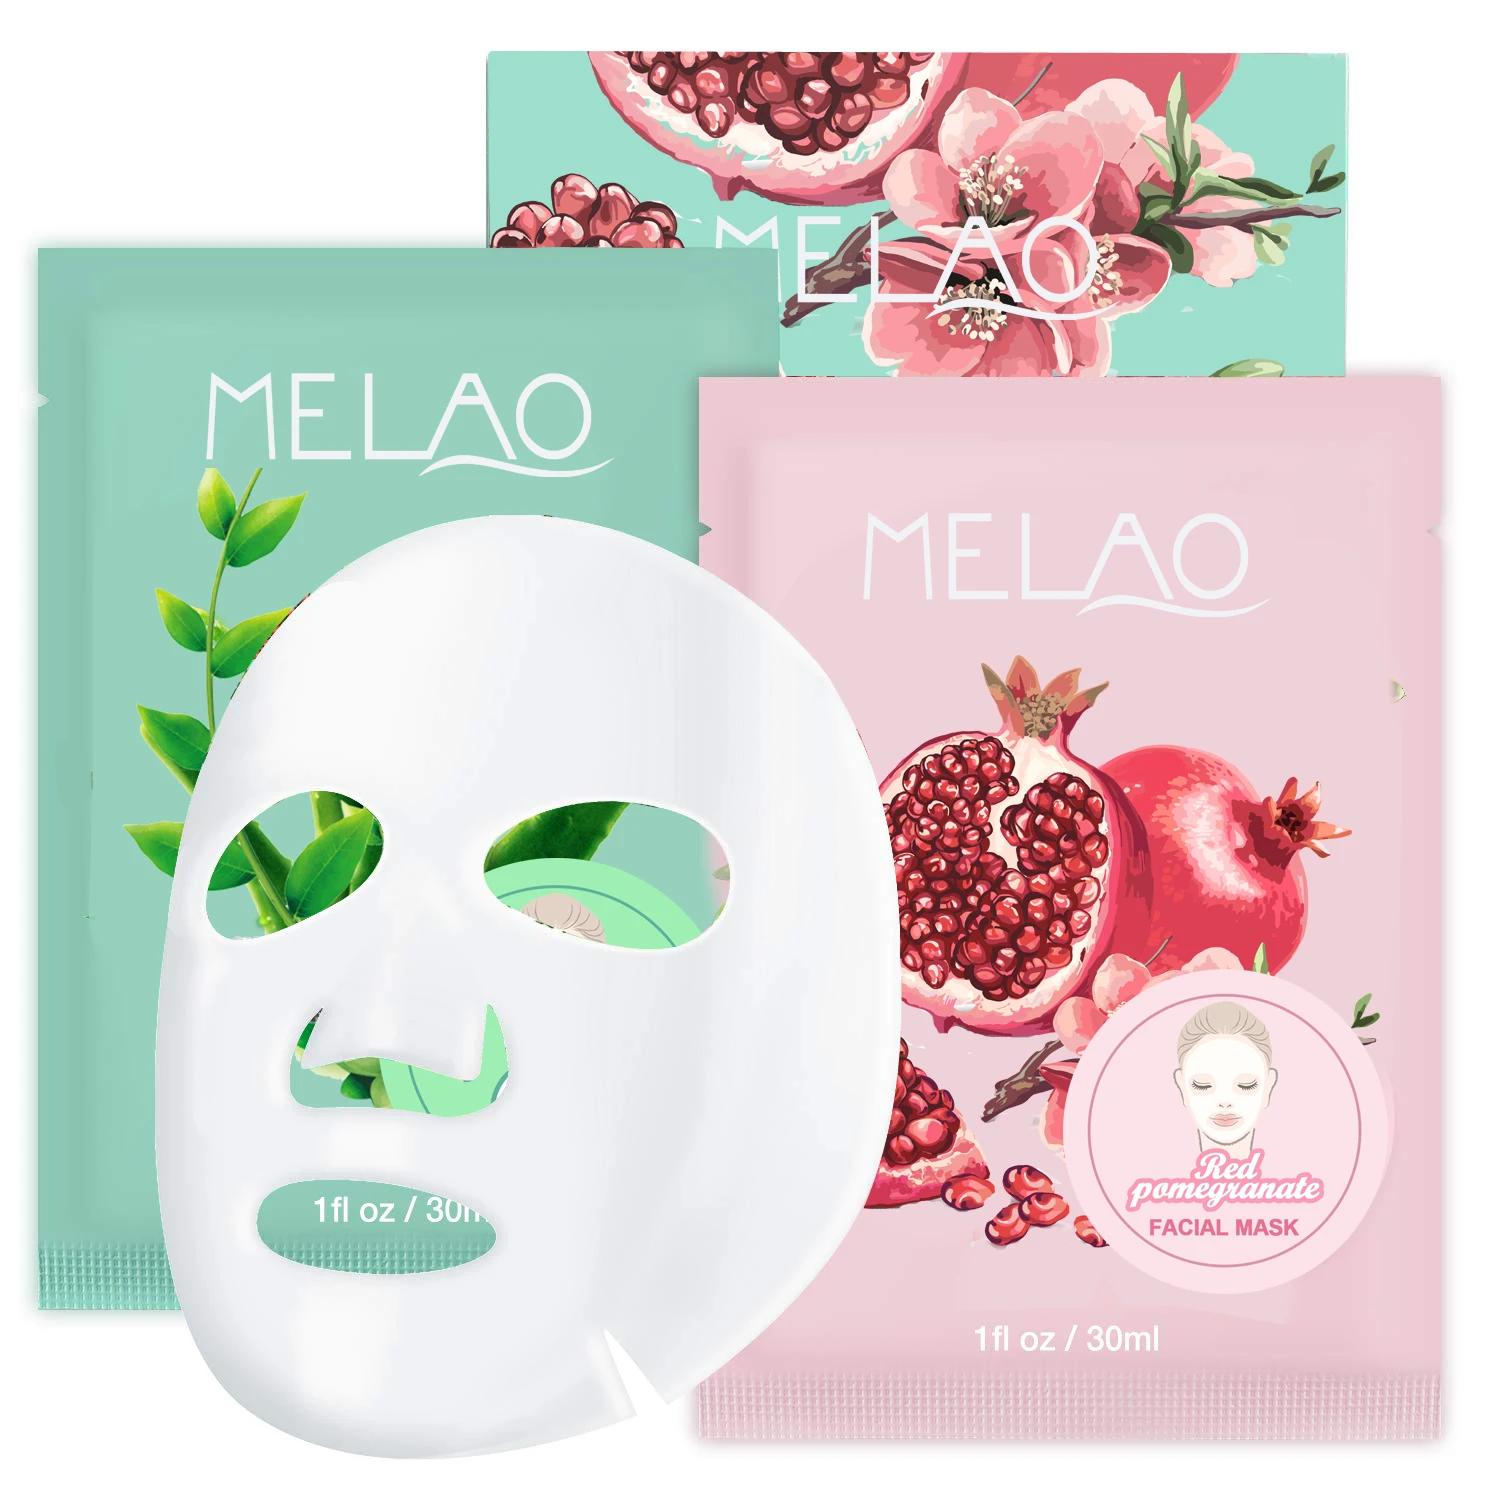 Facial cleansing masks natural clean mask care beauty whitening skin hydrating collagen face for dry deep customise protective